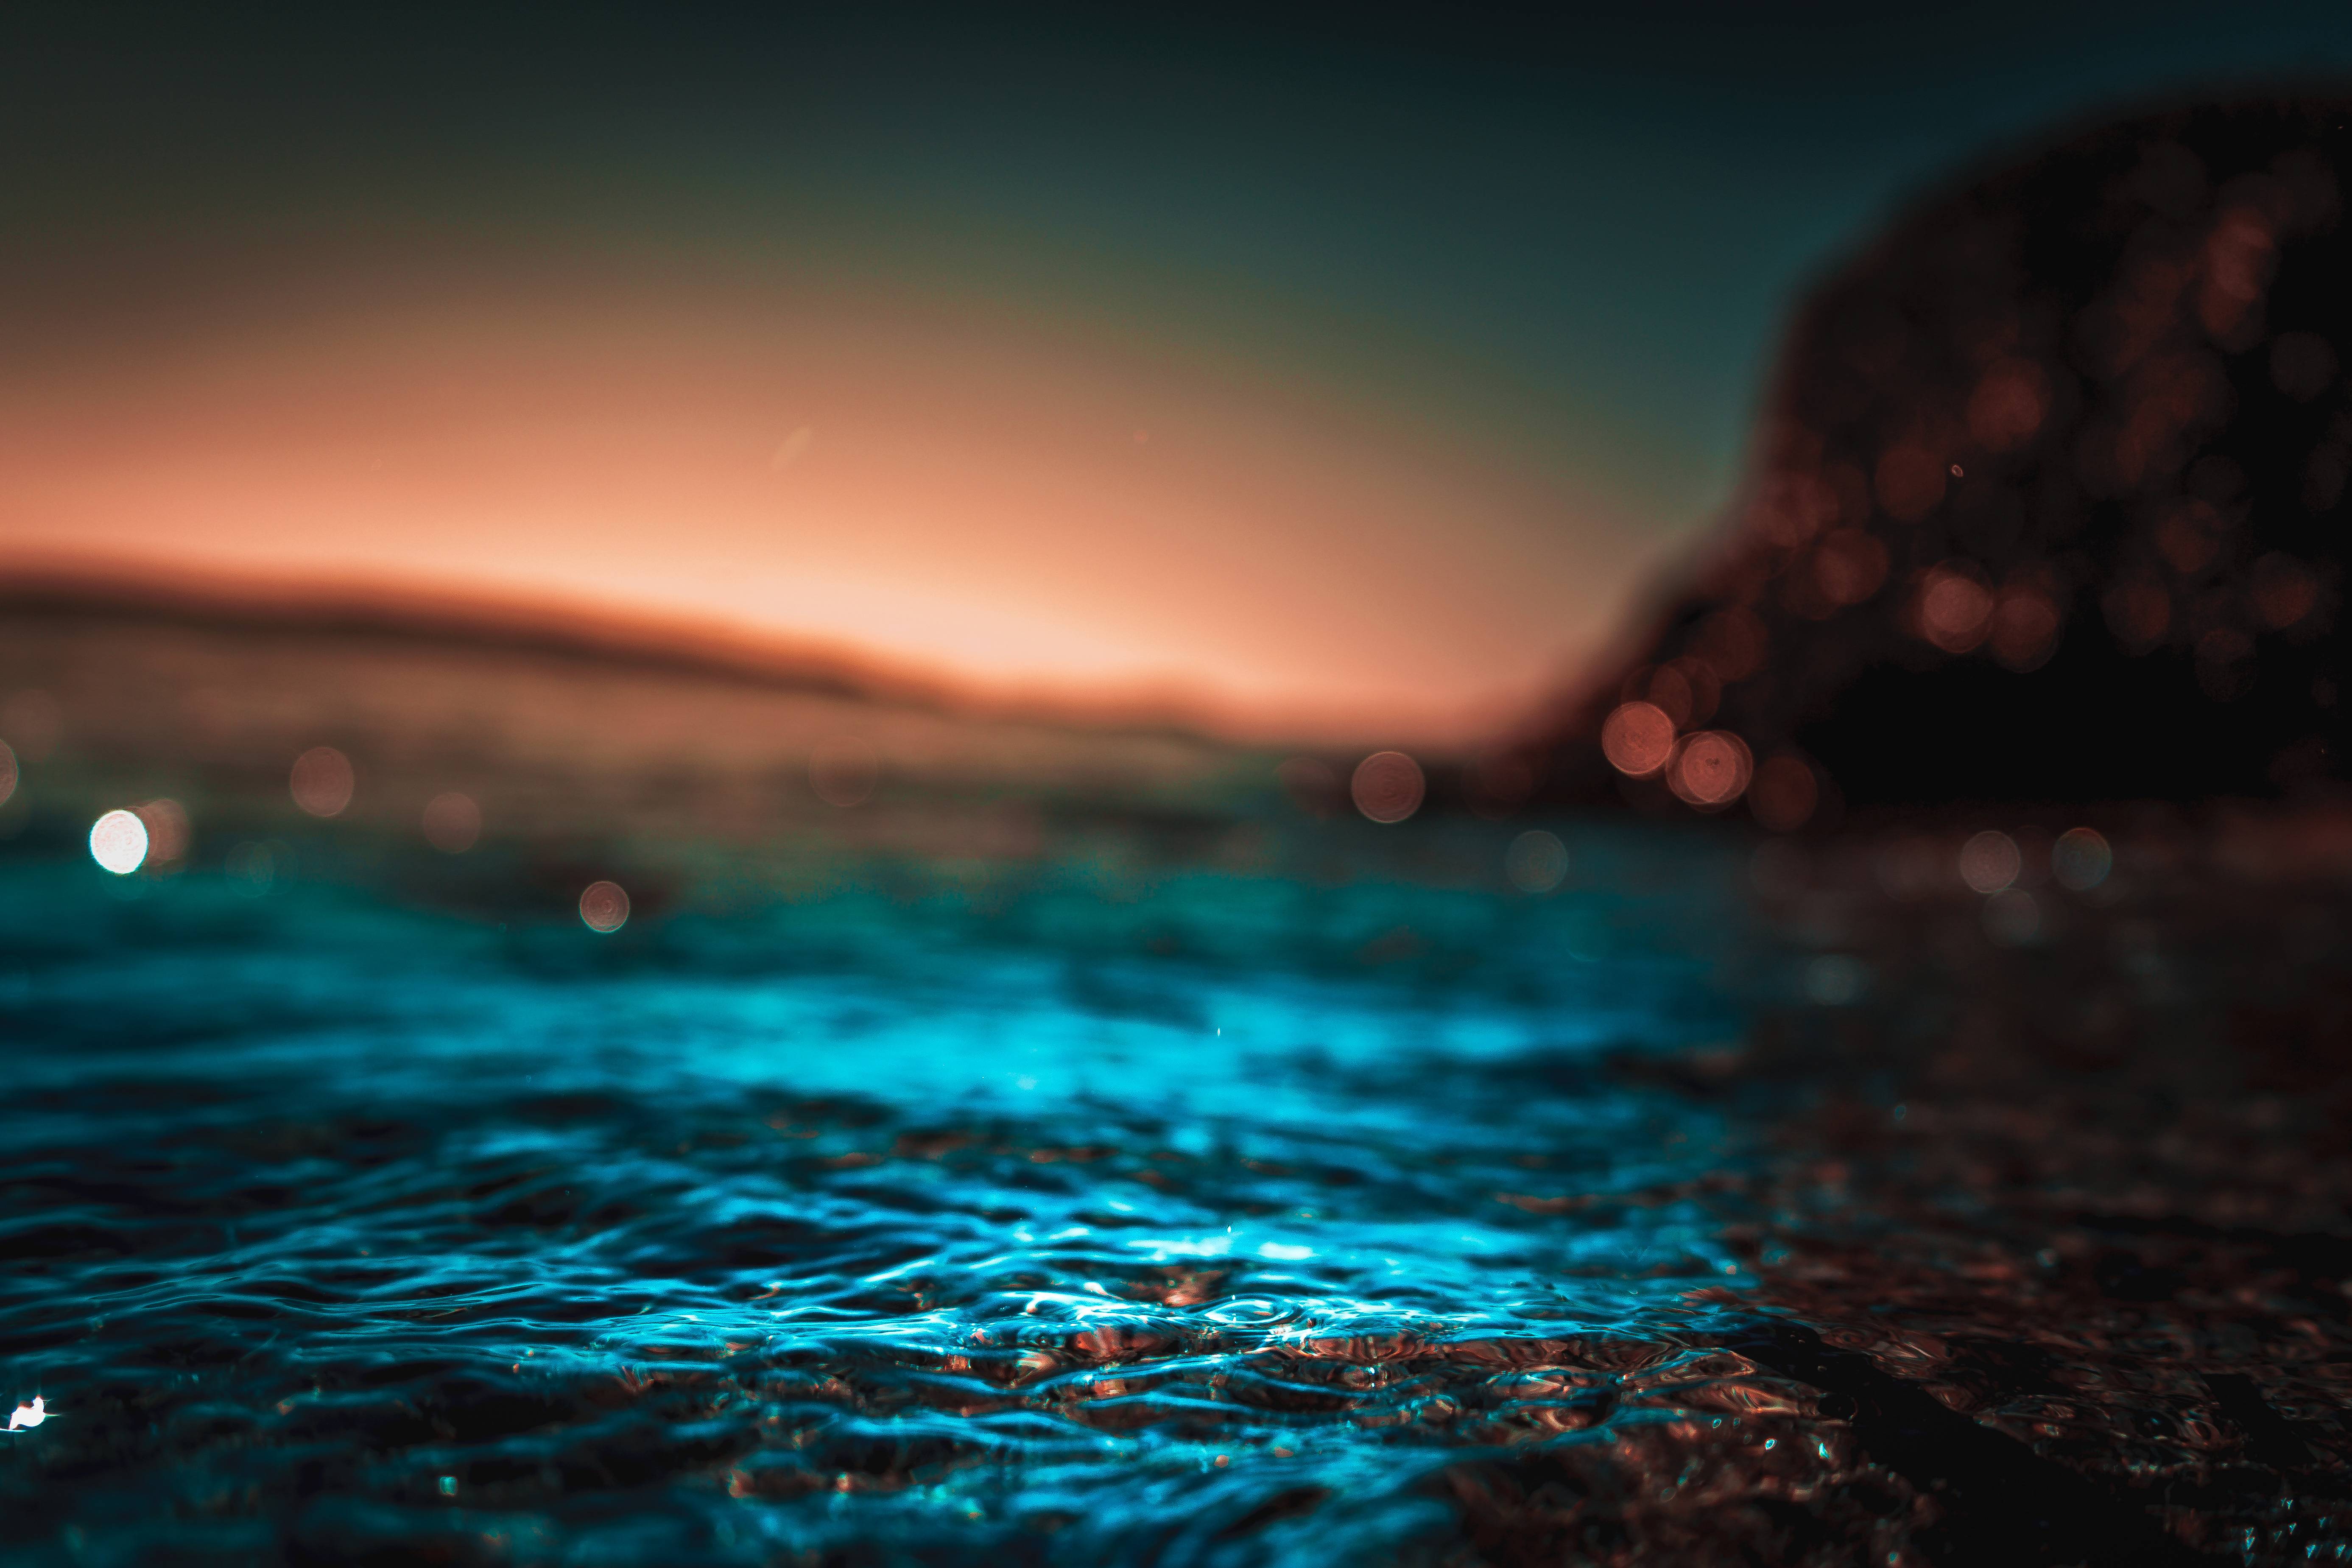 A close up of the water with a sunset in the background - Ocean, water